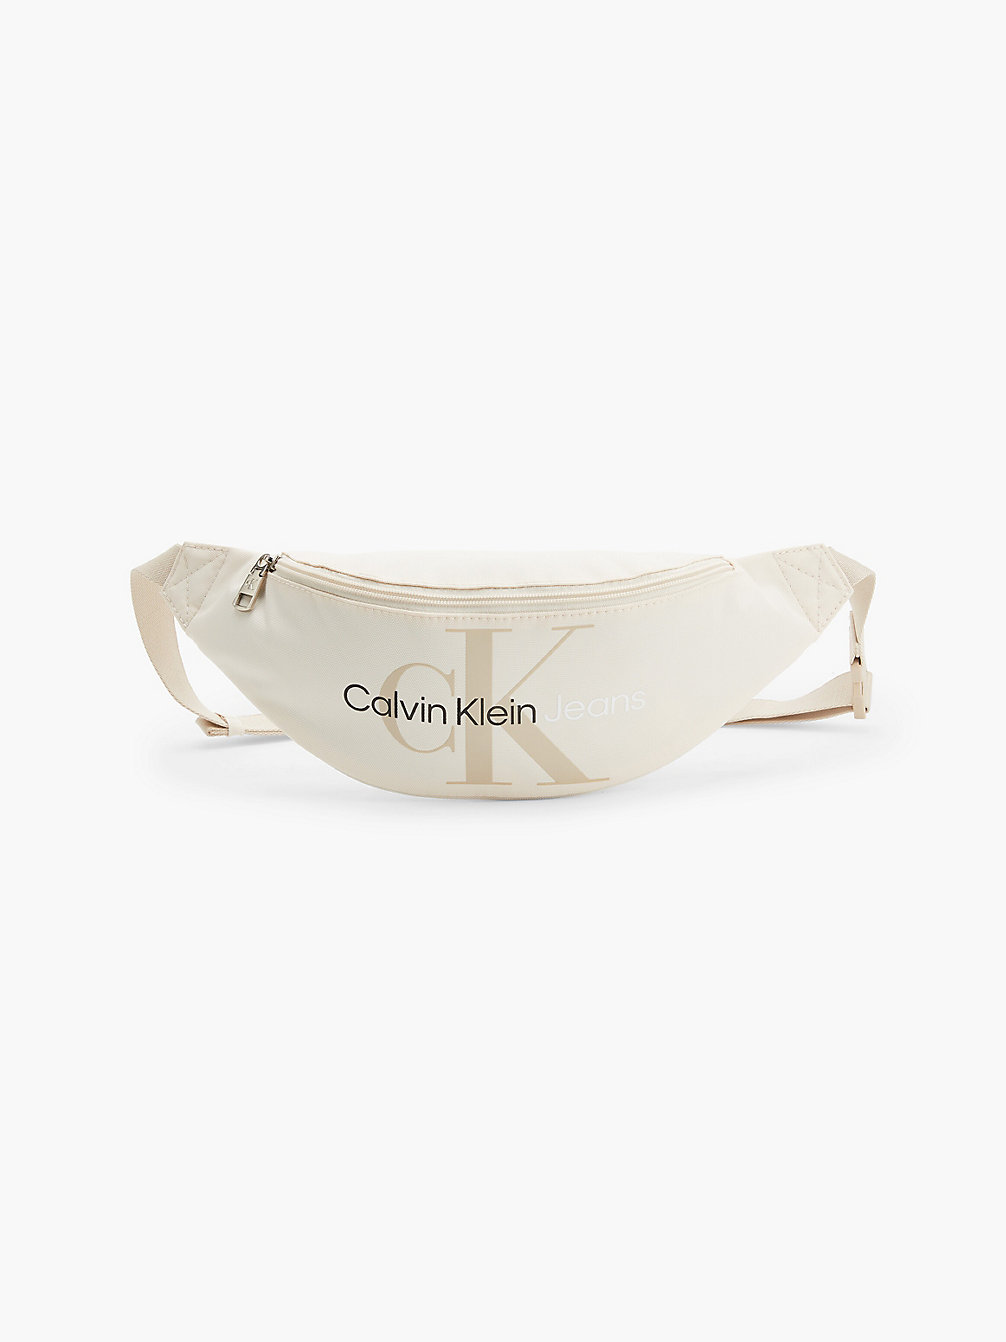 TUSCAN BEIGE Recycled Polyester Bum Bag undefined men Calvin Klein